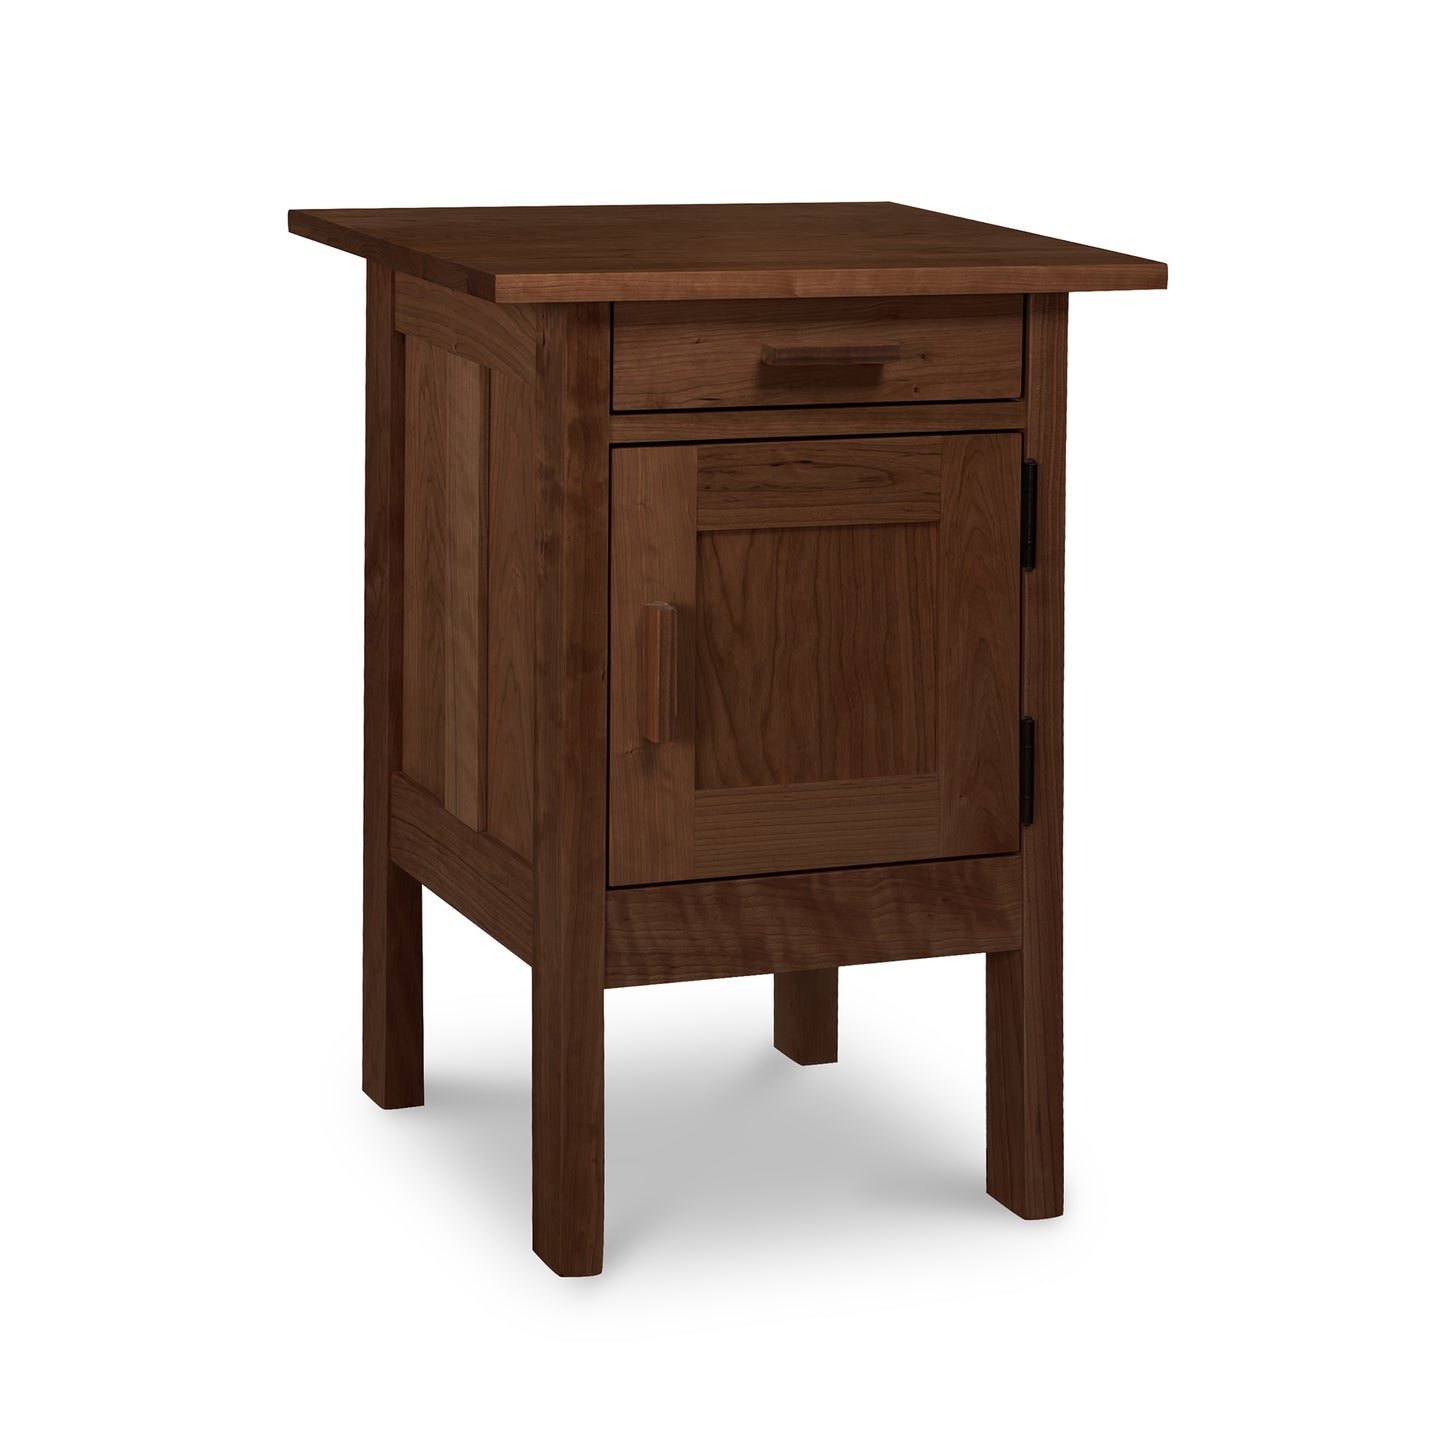 A Vermont Furniture Designs Modern Craftsman 1-Drawer Nightstand with Door, rendered on a white background, featuring solid hardwood construction.